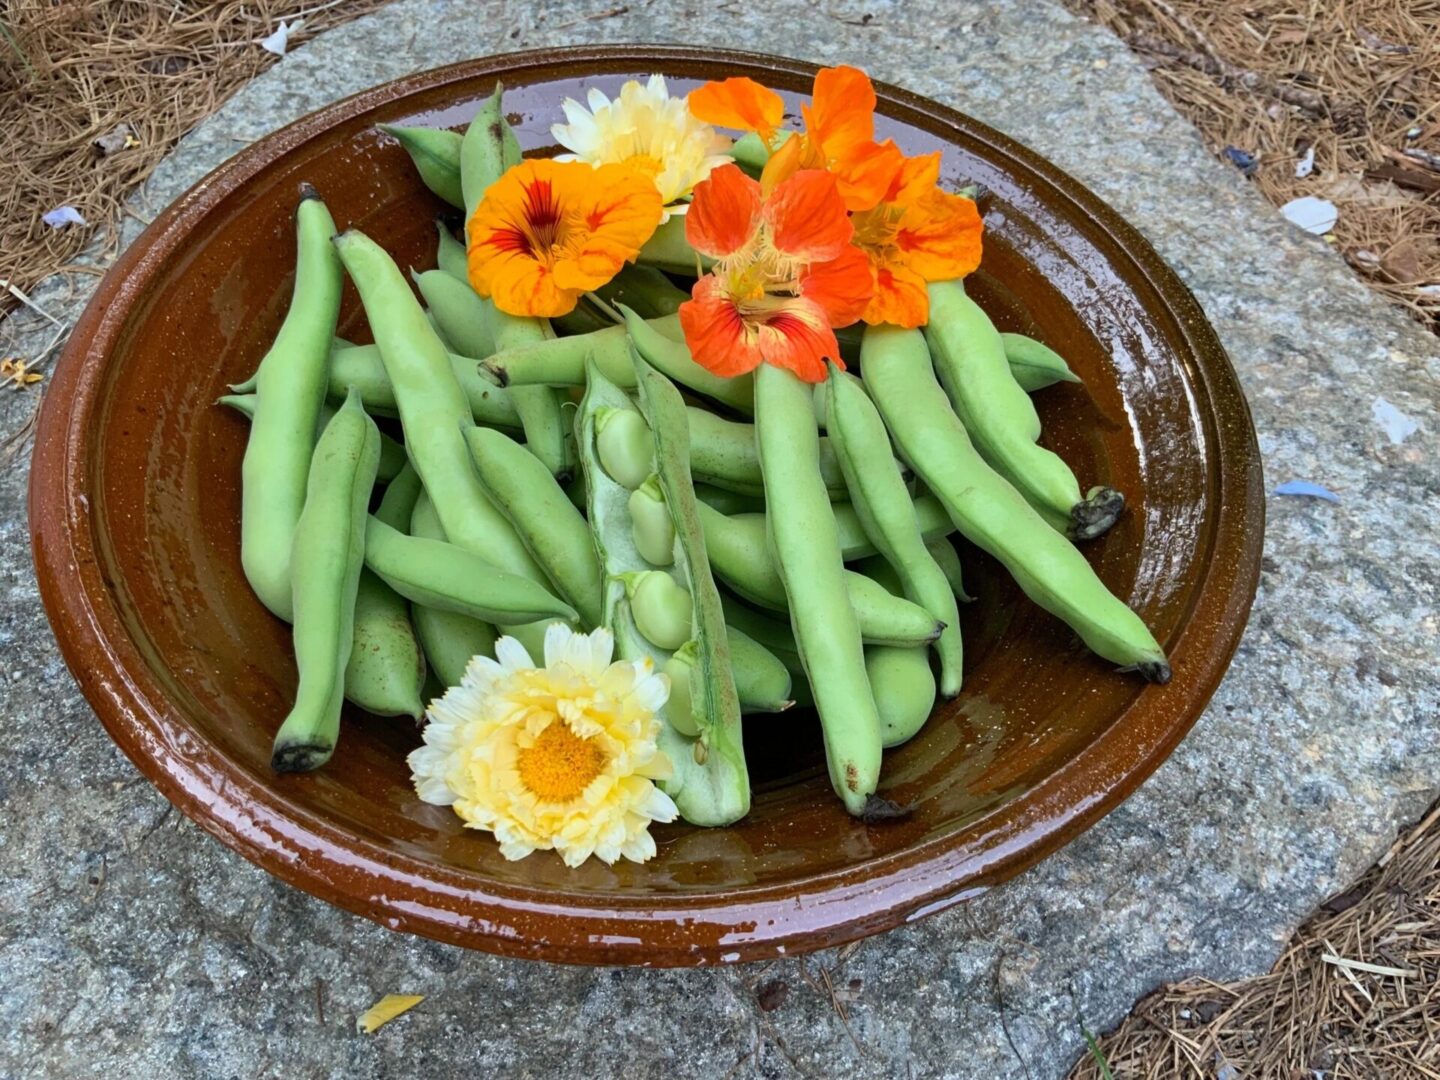 A brown bowl of green beans and flowers.